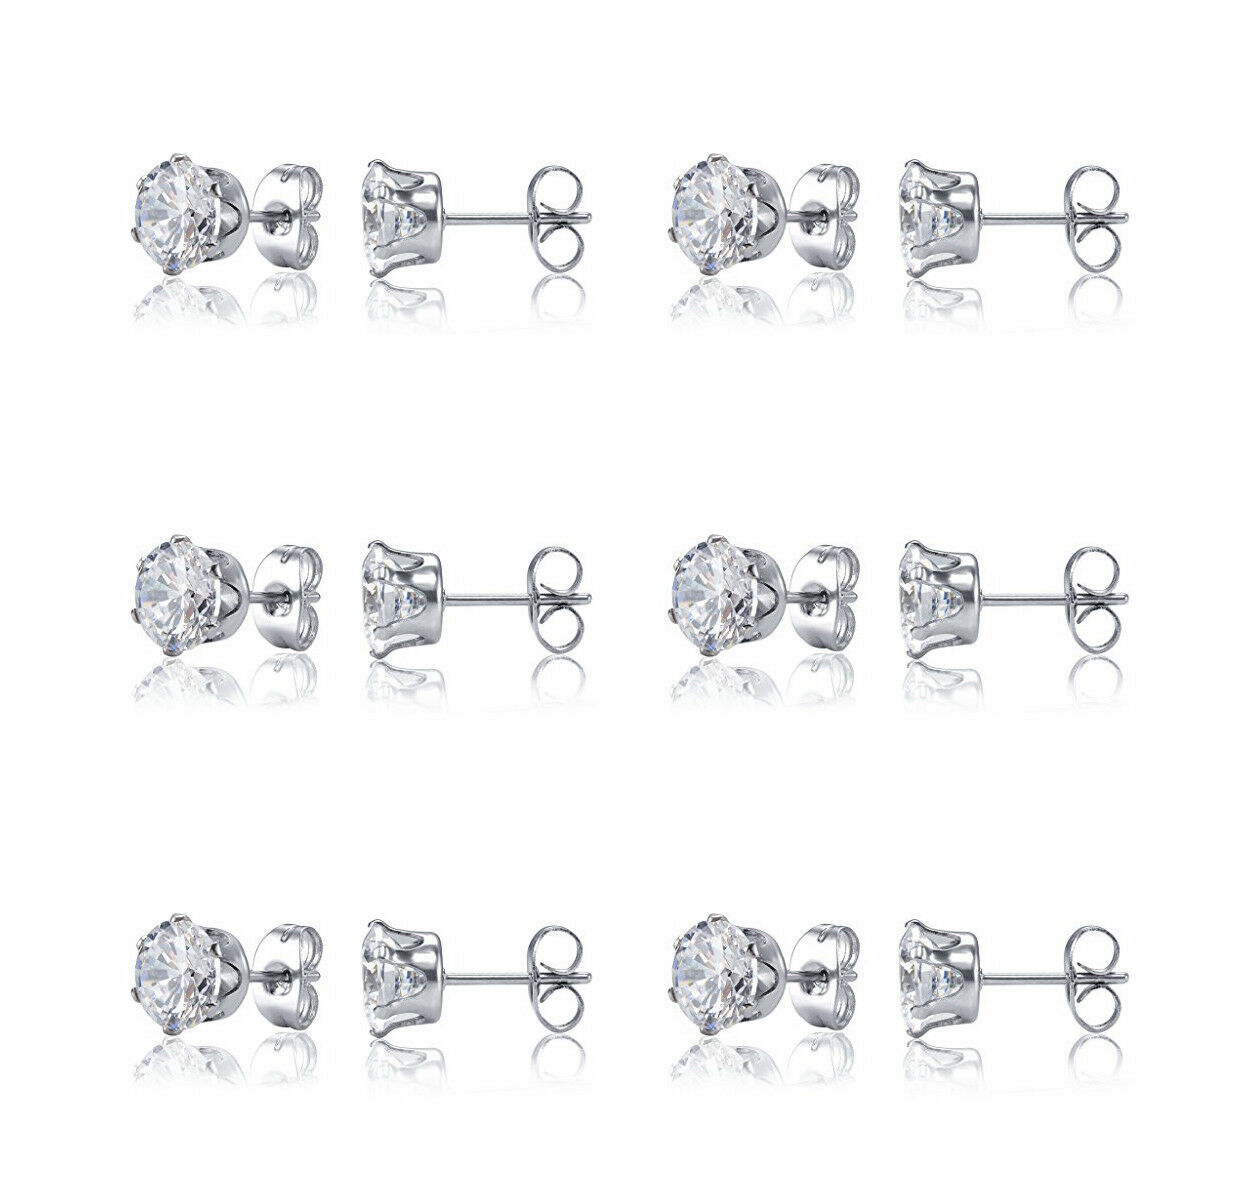 6 PACK SET Surgical Steel Unisex Stud Earrings Made with Crystal